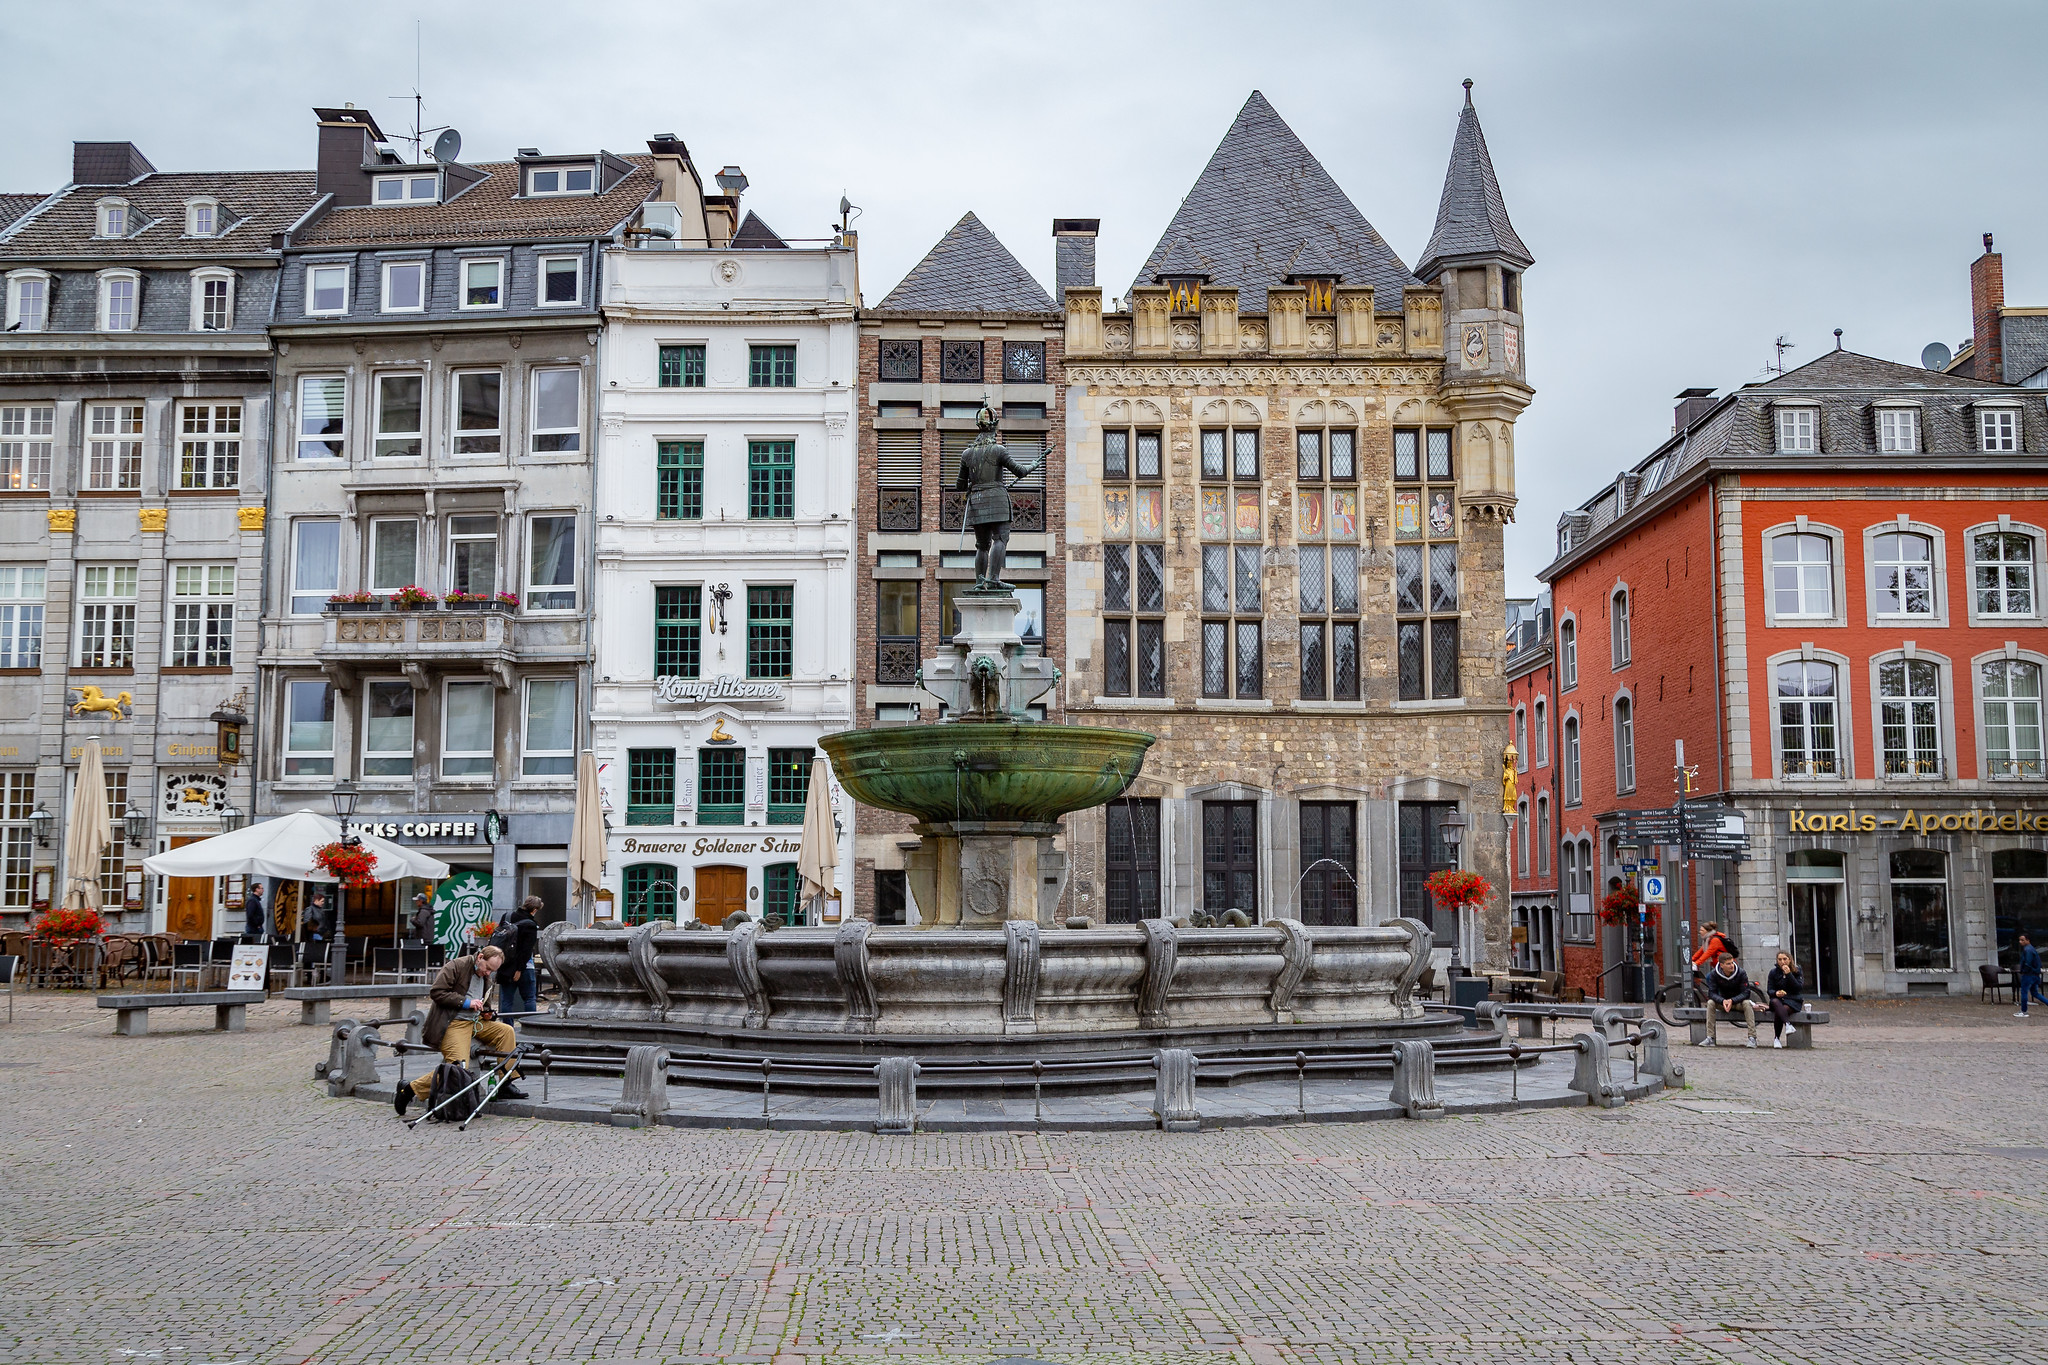 Rebuilt by Water: A Guide to Aachen